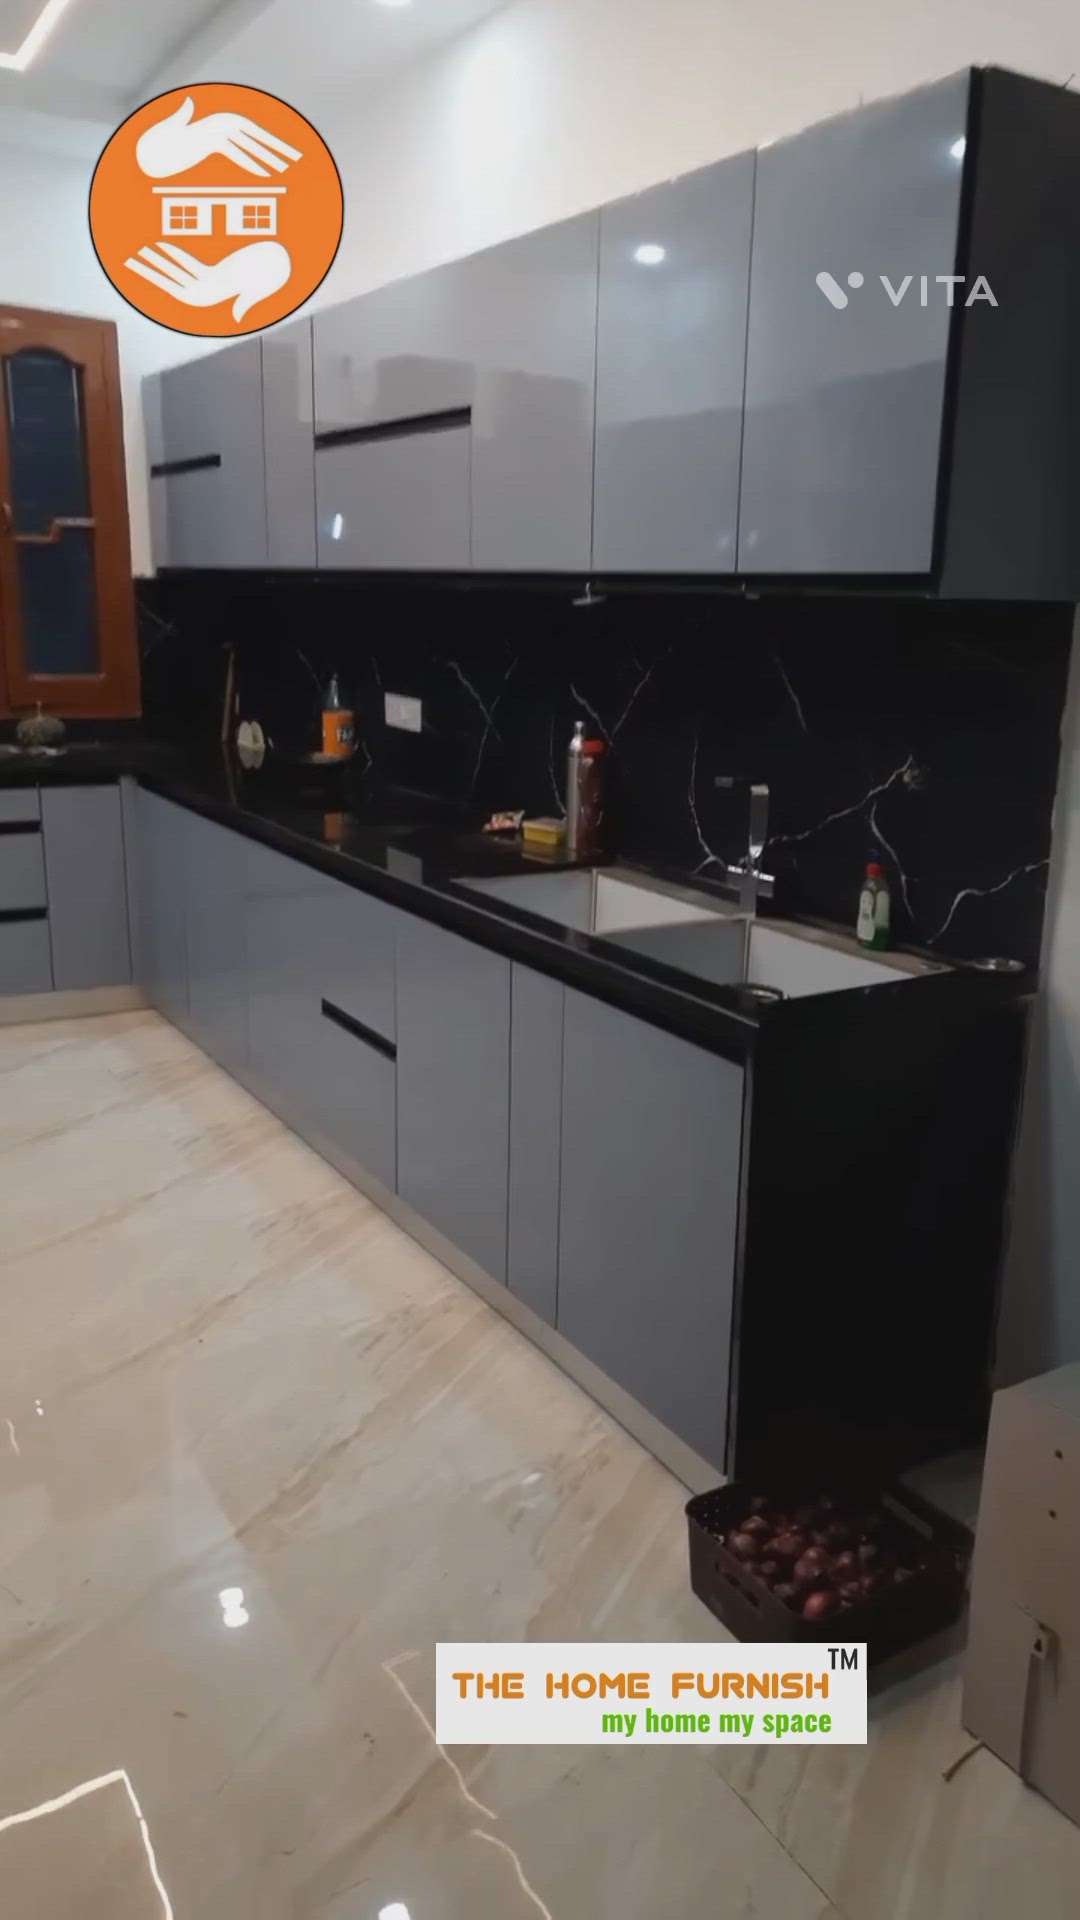 Next Generation Kitchen! Indian Style...Exclusive collection of Modular Kitchen designs at THE HOME FURNISH.  Explore the latest modular kitchen designs & consultations. Inquiry Please Contact! https://wa.me/c/917018317671
#kitchen #modularkitchen #chimney #kitchendesign #kitcheninteriordesign #kitchendesignideas  #interiordesigner #interiordesigner #interiordecorating #interiordesign #interiors #architecture #architecturedesign #thehomefurnish